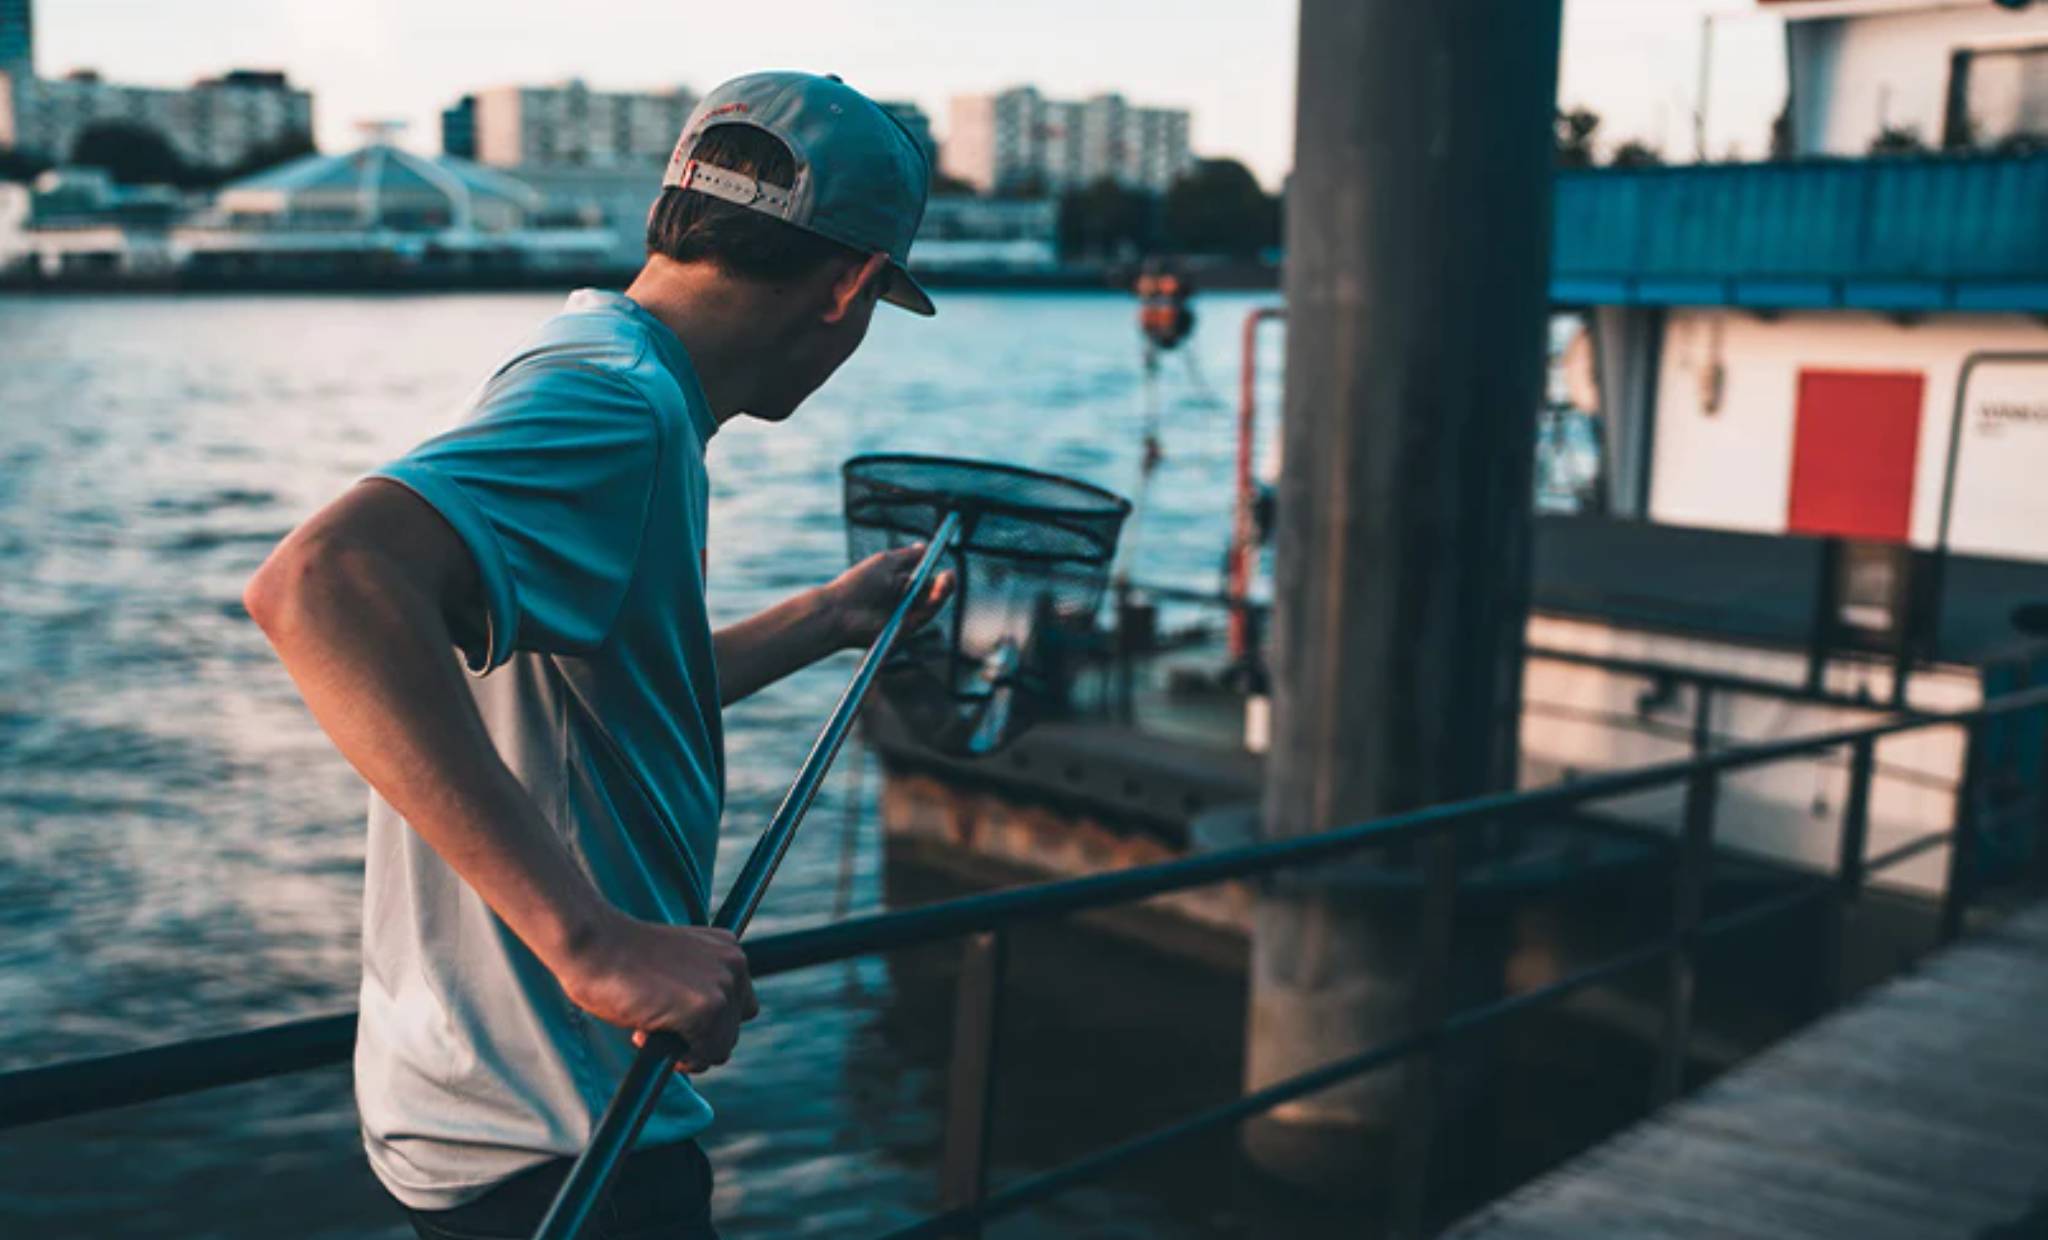 How is urban fishing connecting youth with the outdoors?